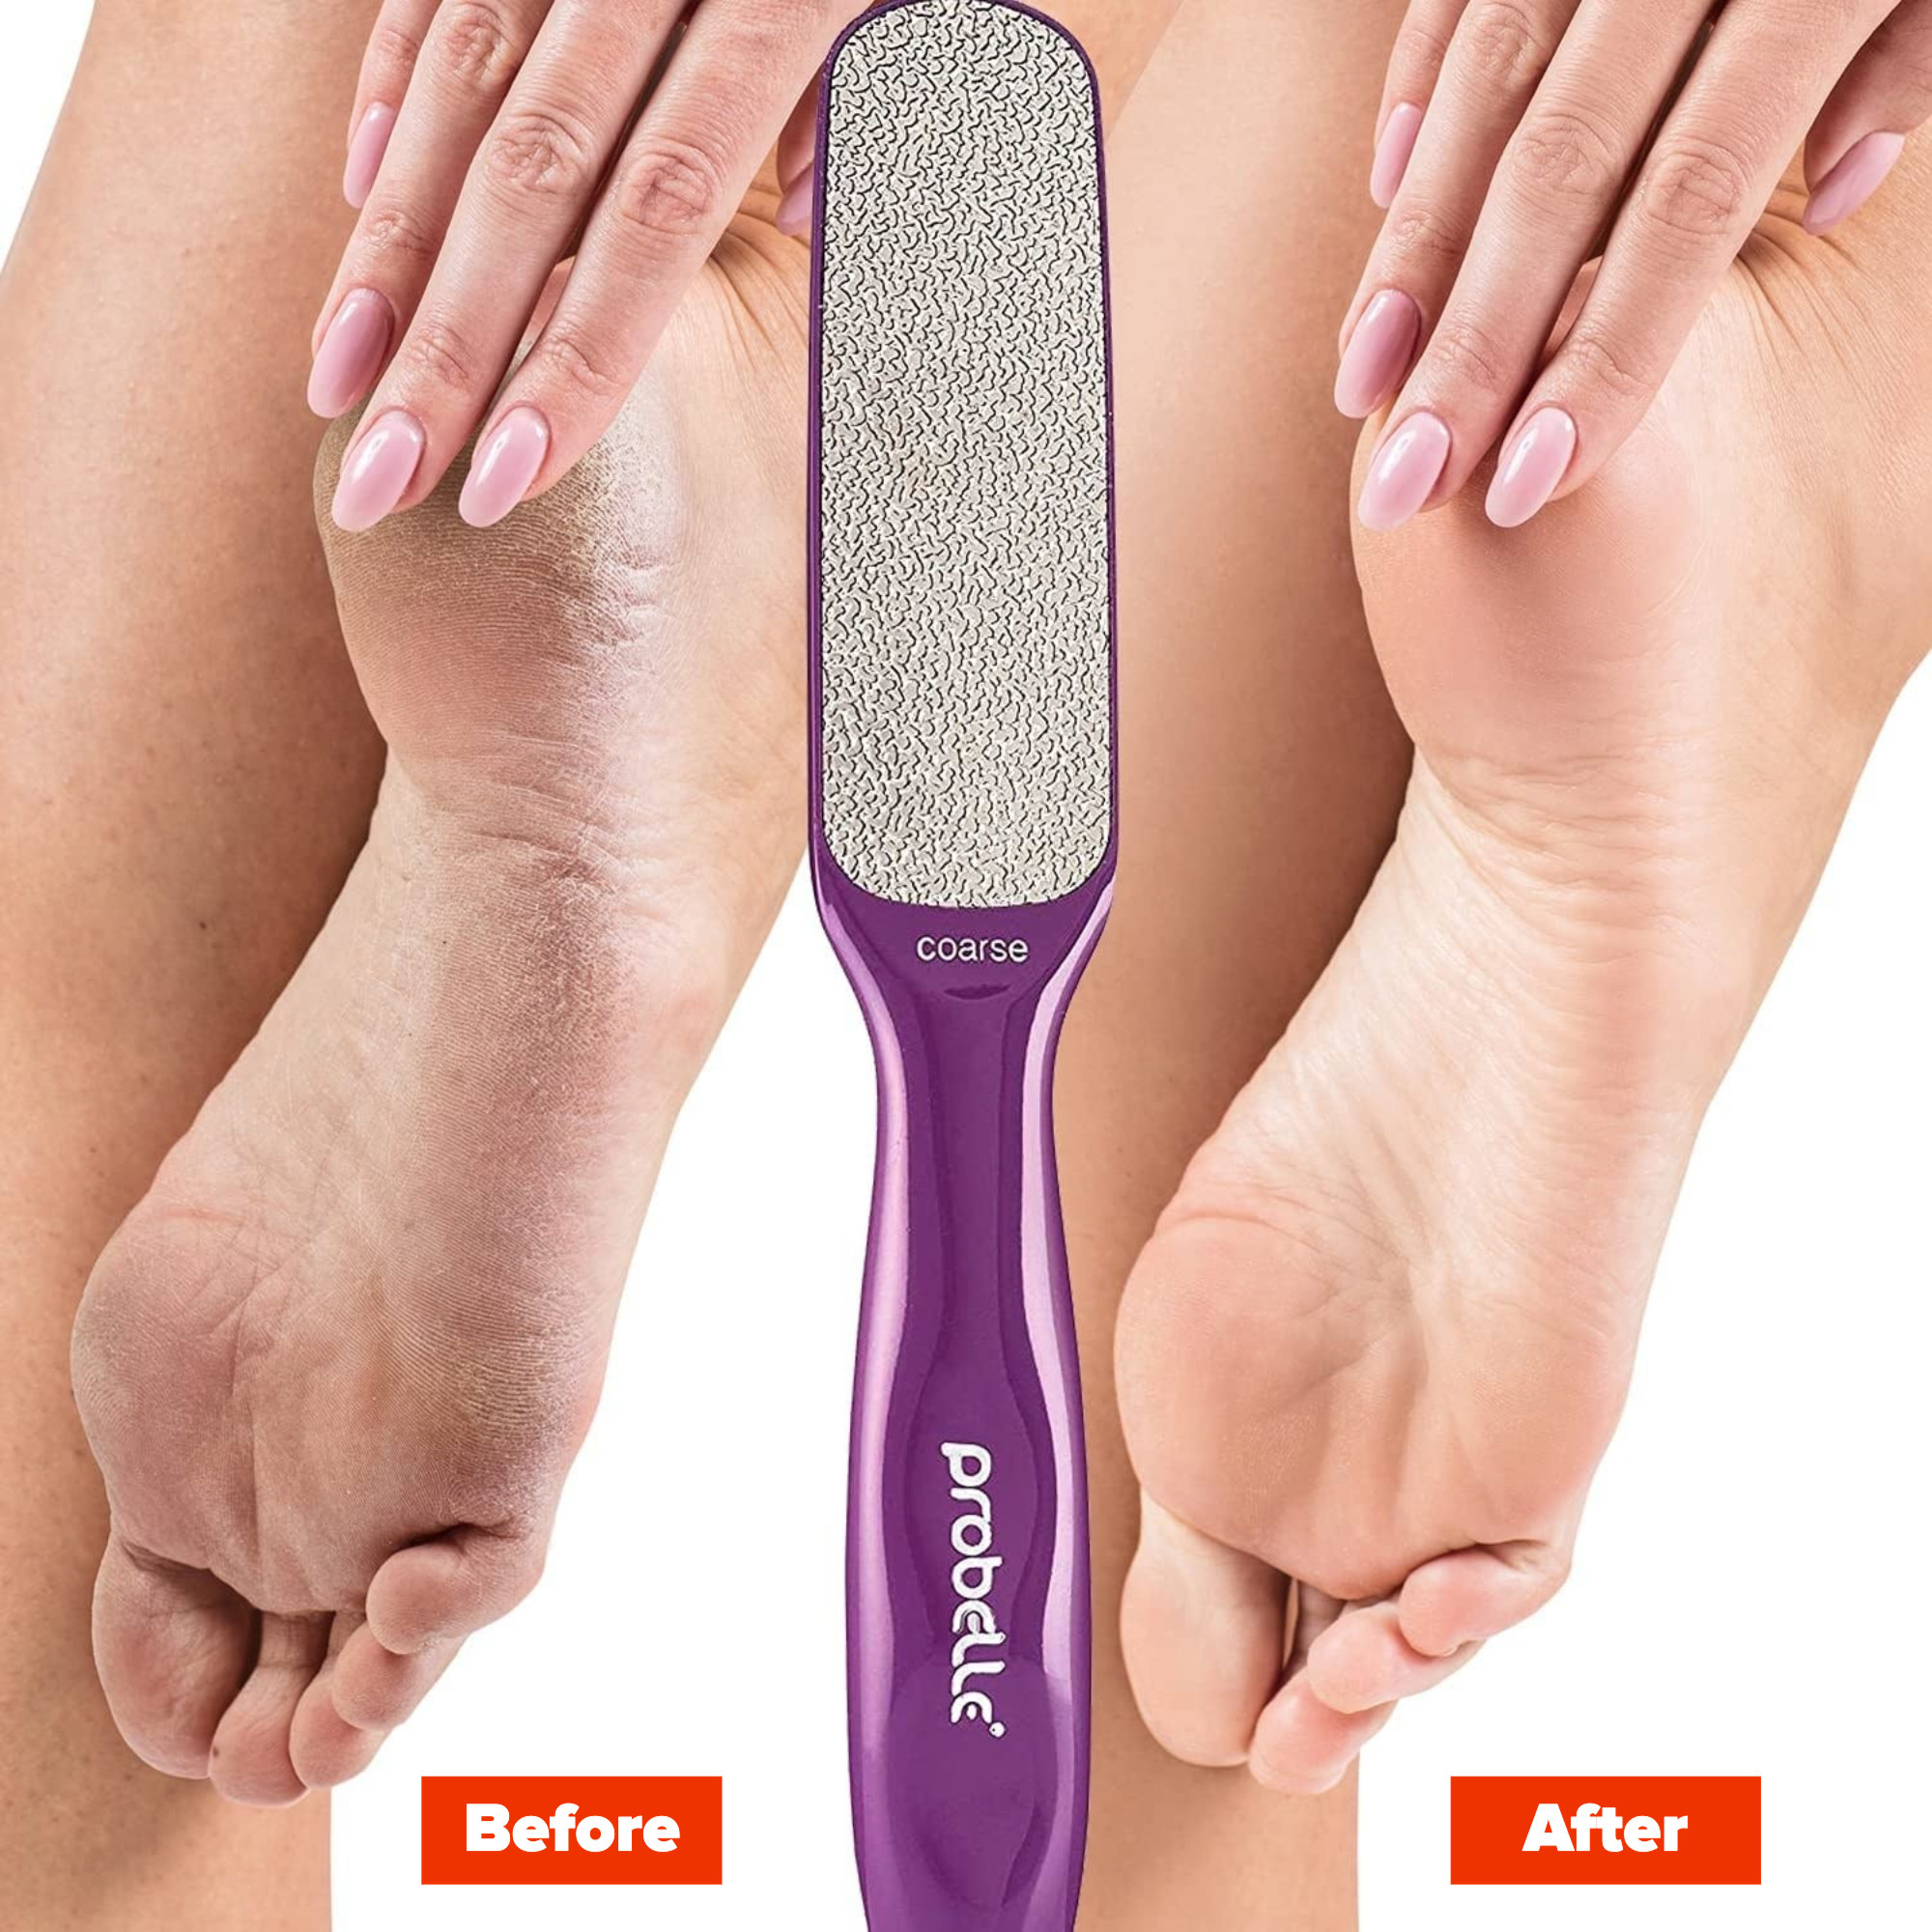 A before and after of dry feet and smooth feet with the foot file in the middle